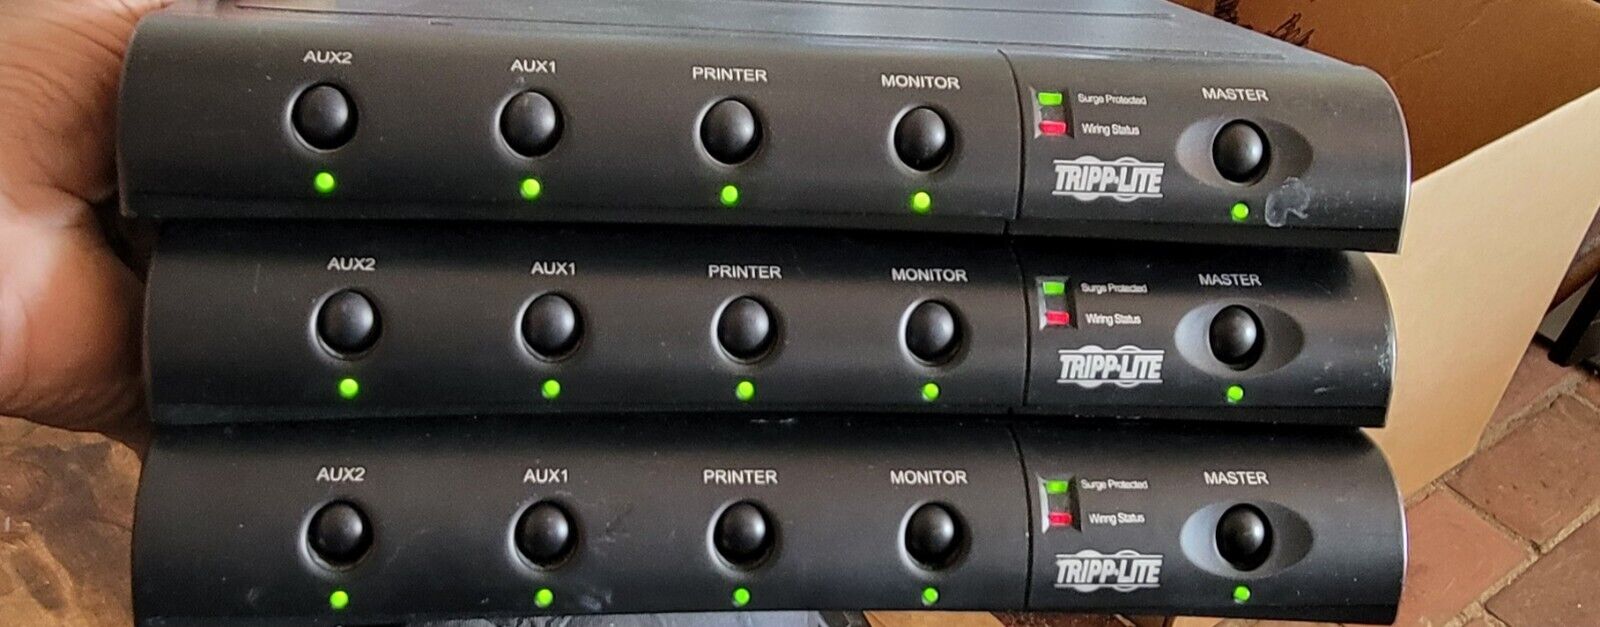 Tripp Lite TMC6 Surge Protectors, Power Strips. Fully functional and tested. 